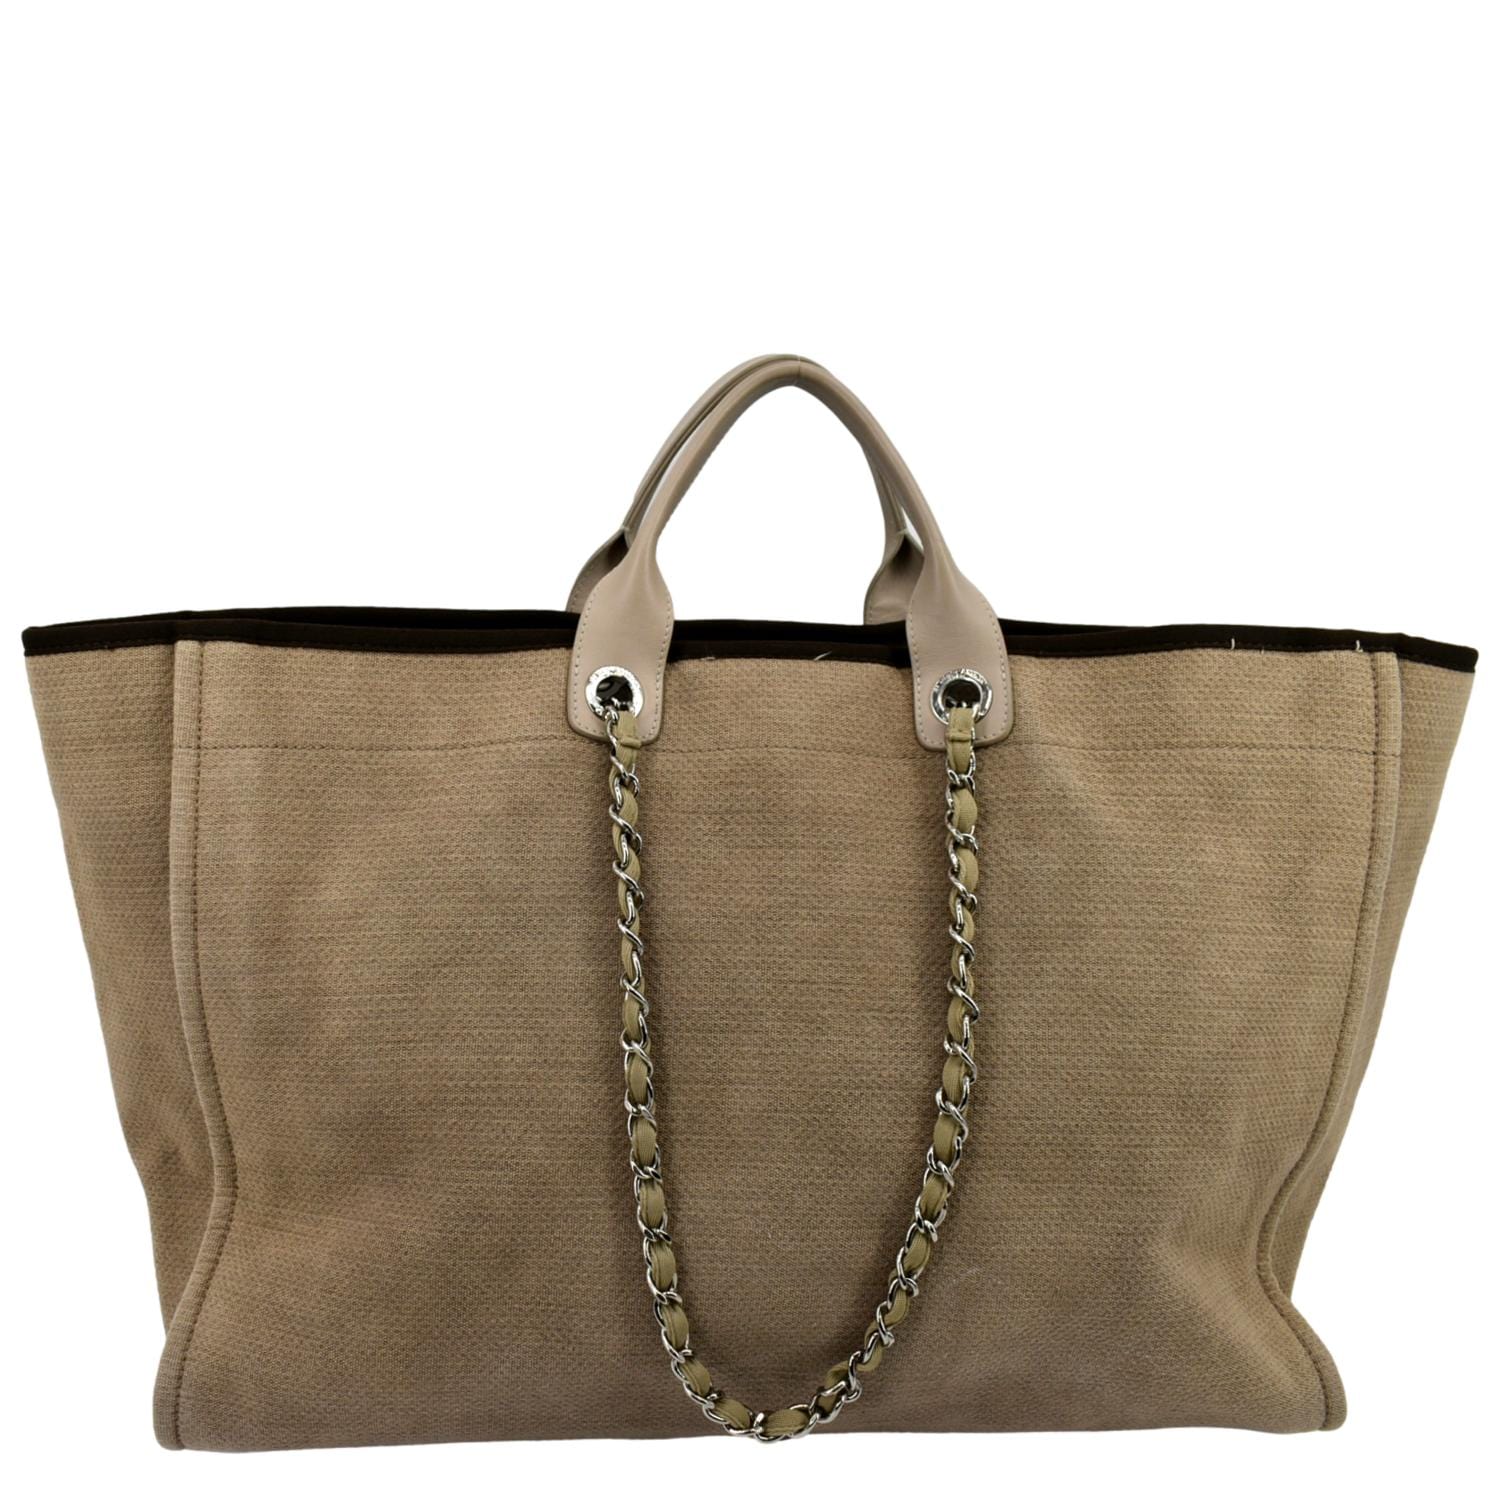 Chanel Beige/Brown Deauville Tote Chanel